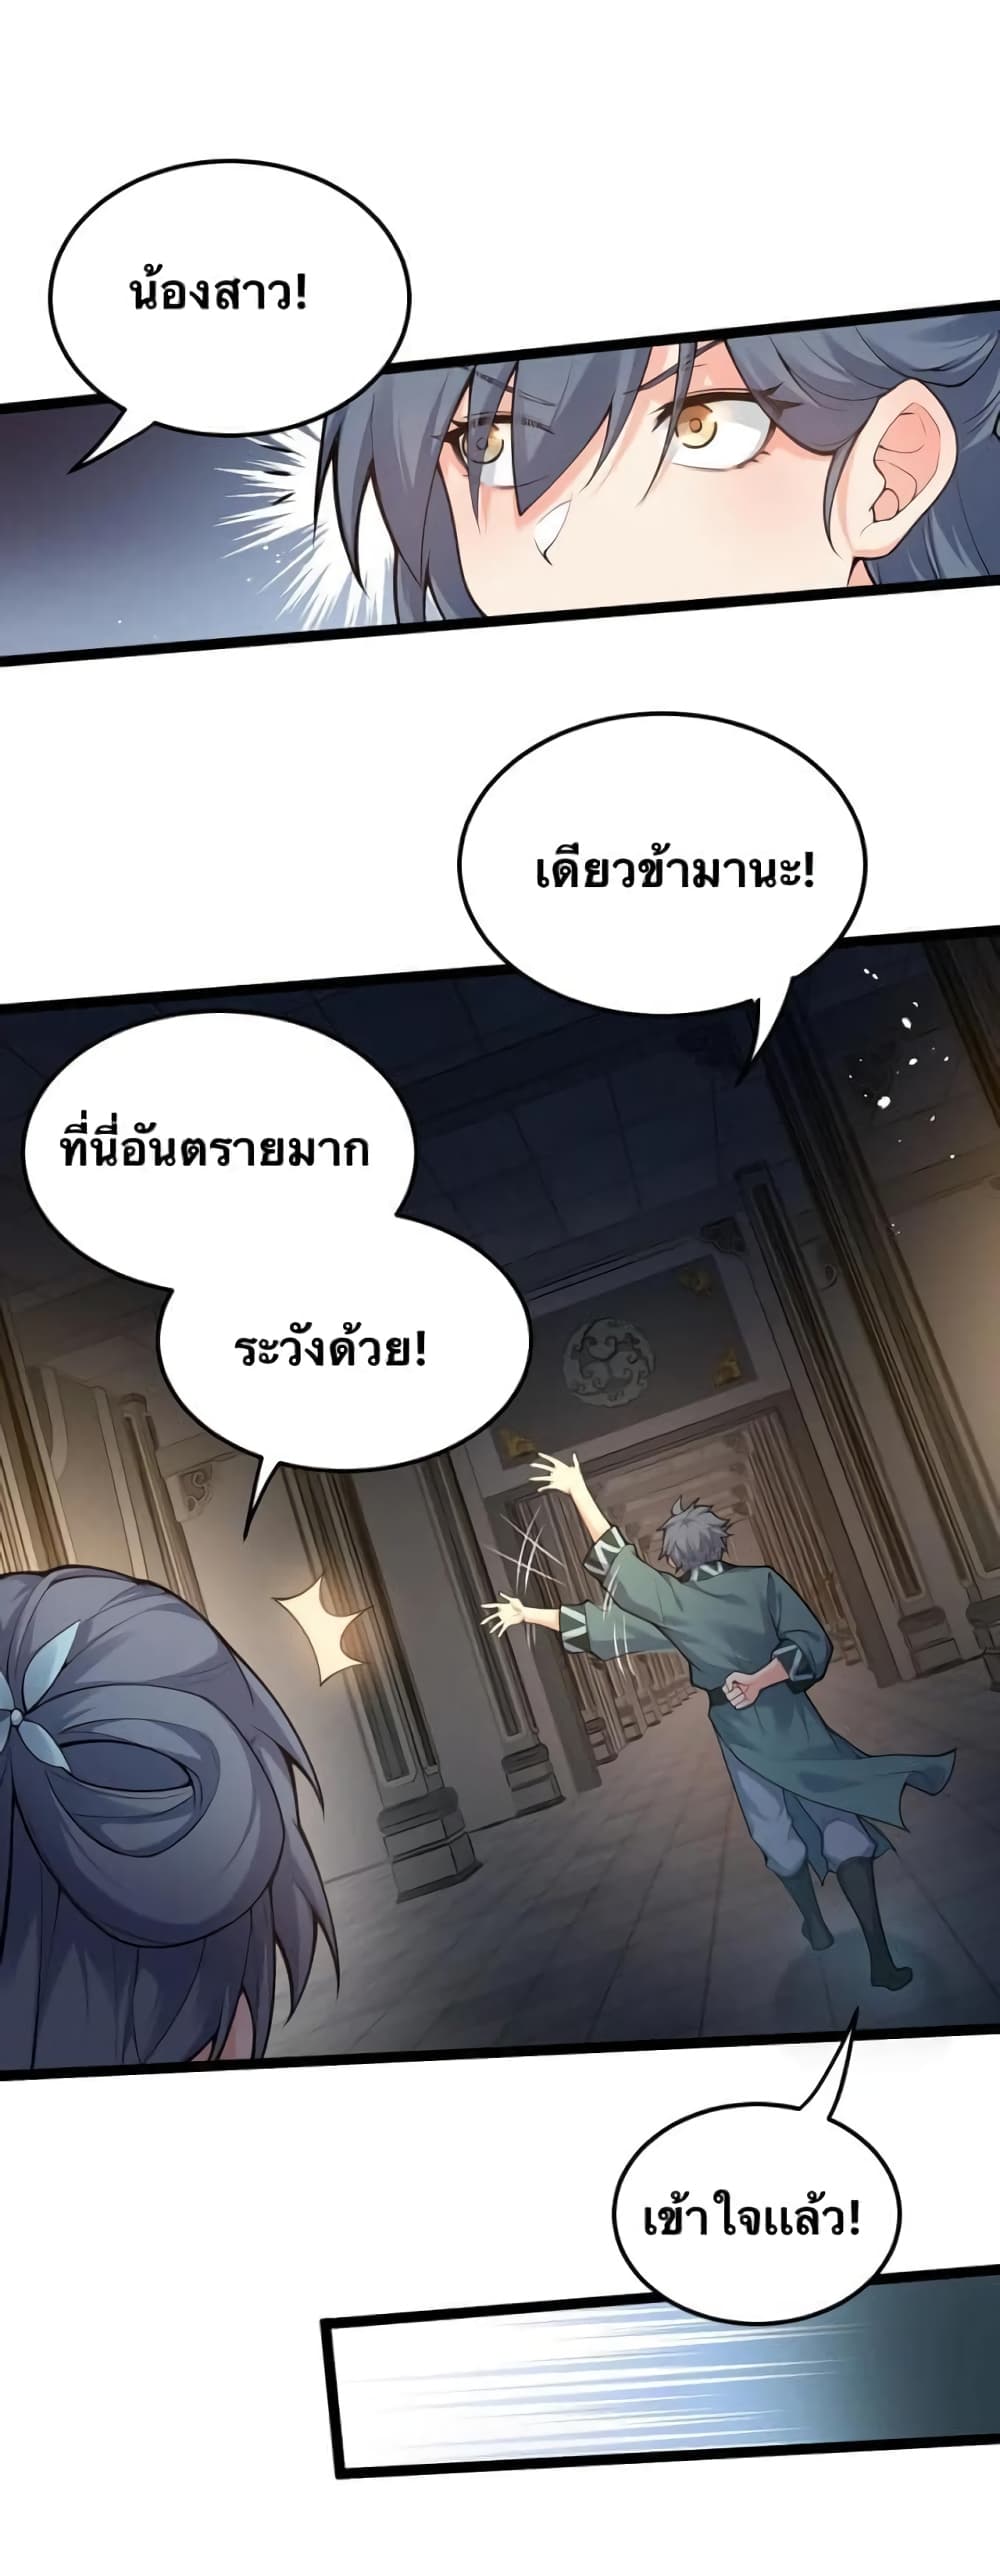 Godsian Masian from Another World 77 แปลไทย